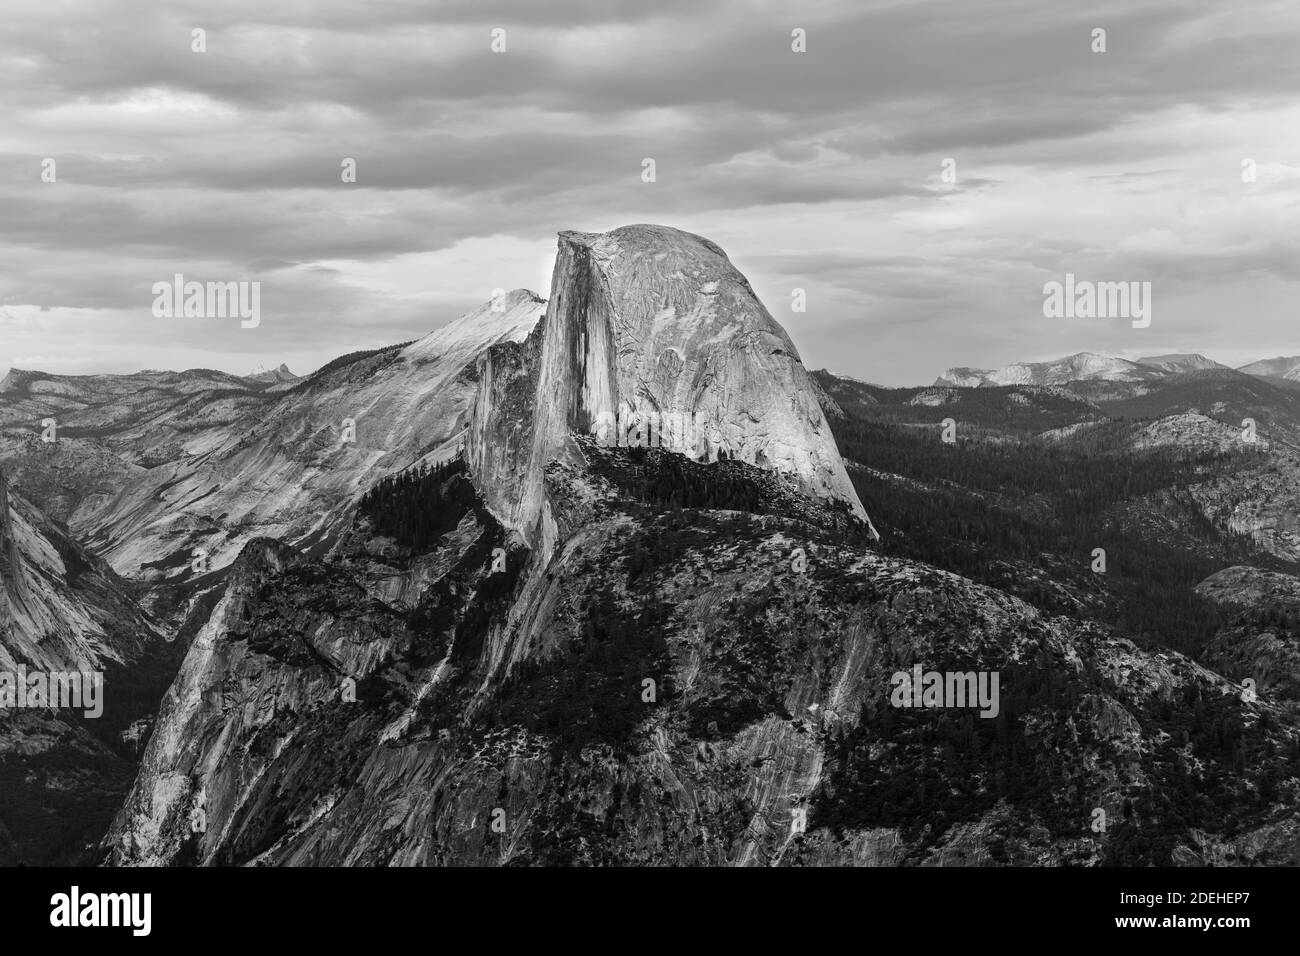 Glacier Point, an overlook with a commanding view of Yosemite Valley, Half Dome, Yosemite Falls, and Yosemite's high country. Stock Photo